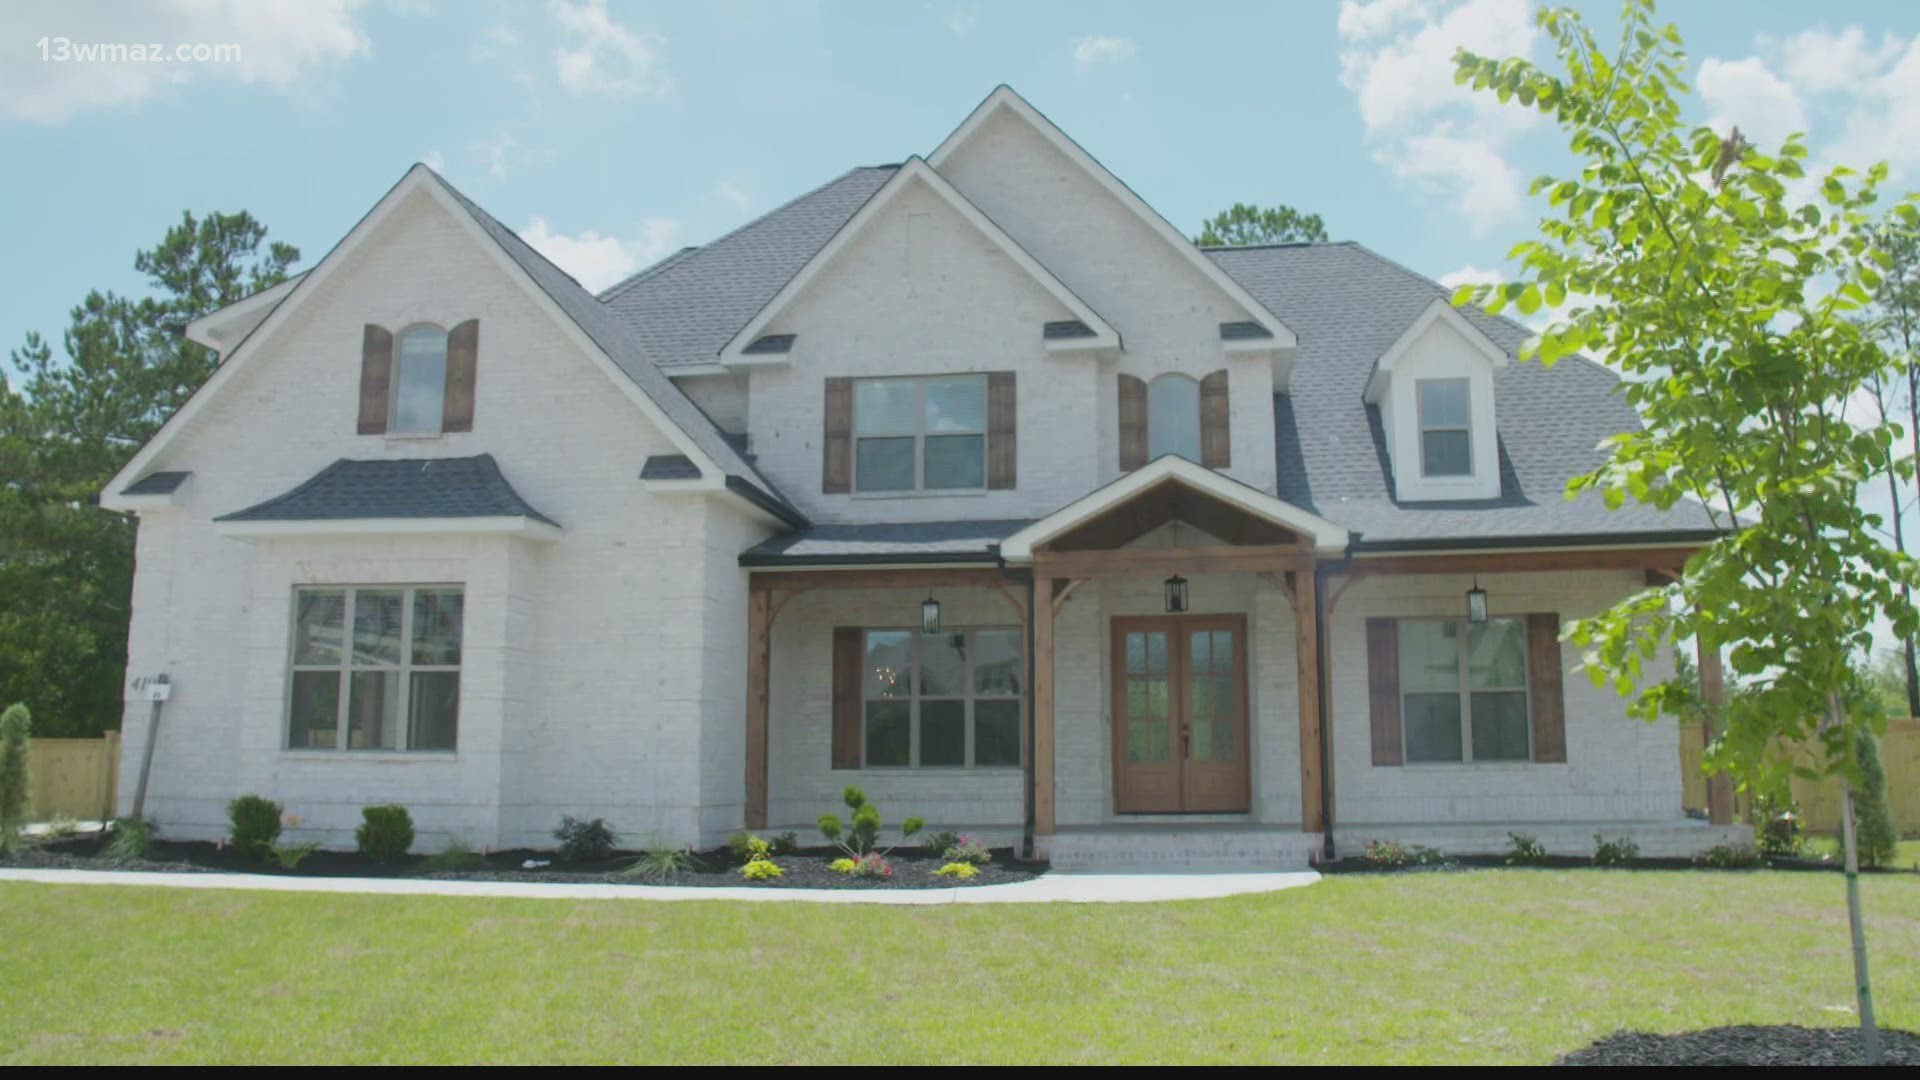 This year’s St. Jude Dream Home Giveaway campaign came to an end on Sunday. Jessica James is the winner of the home!